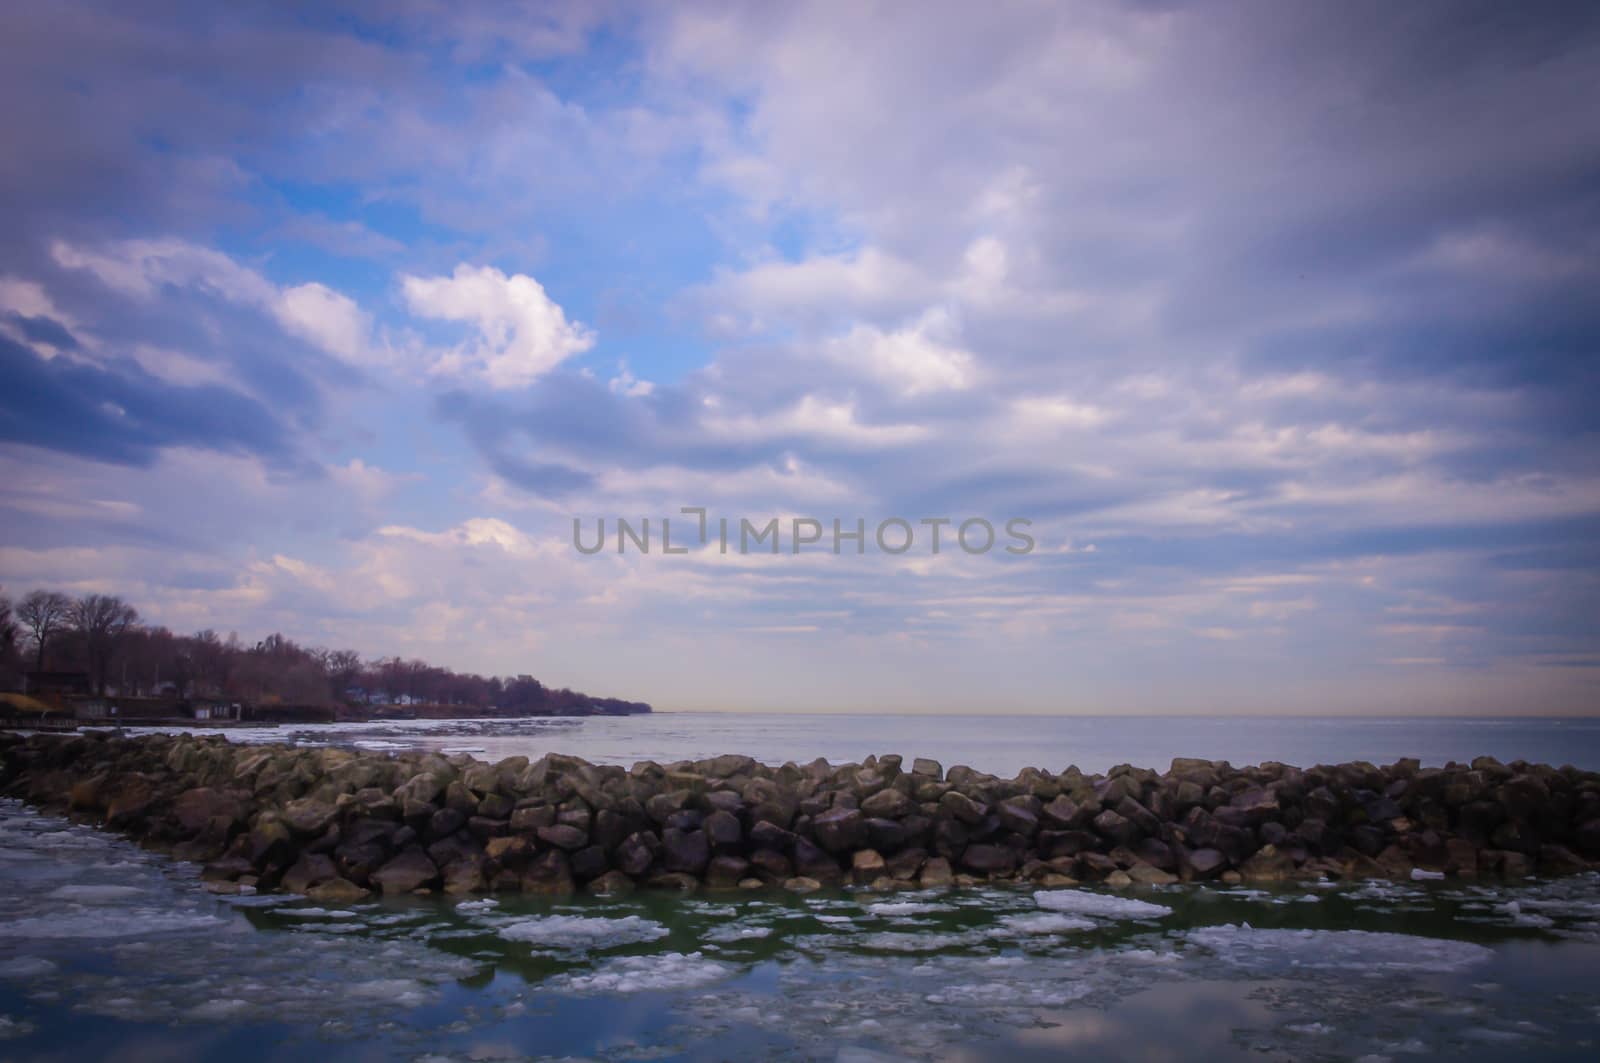 Winter scene with breakwall and ice floes at sunrise at Lake Erie